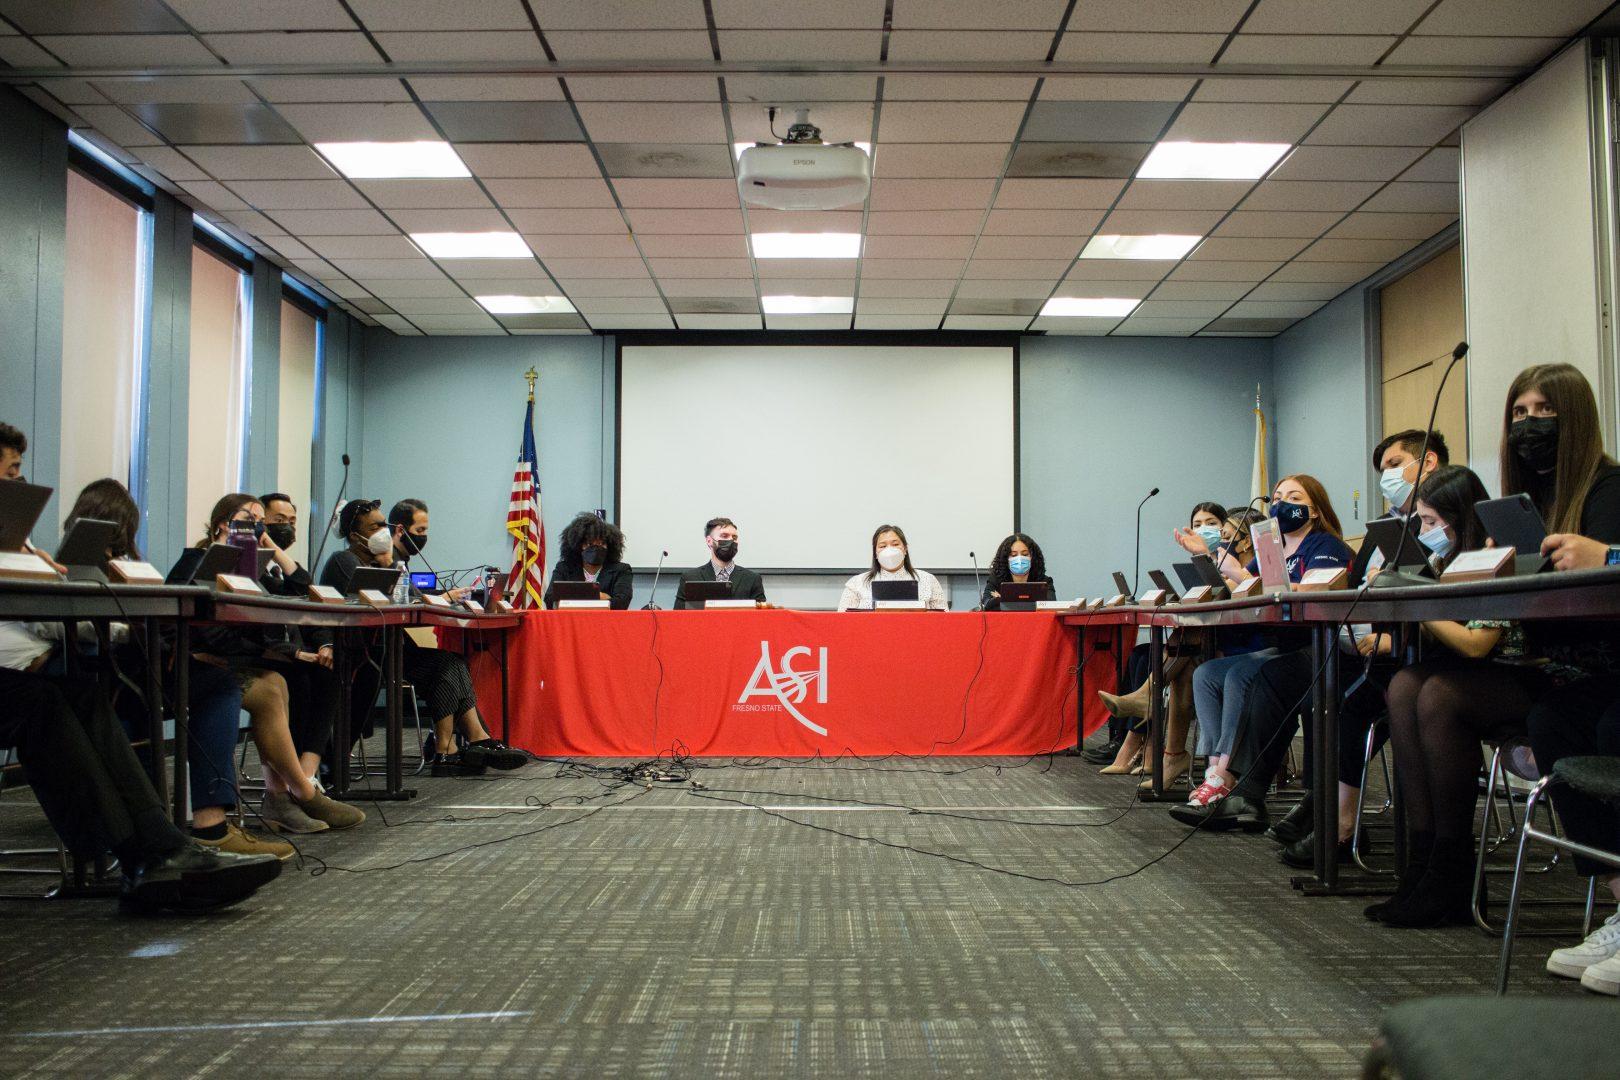 Fresno States Associated Students Inc. gathered in ASI senate meeting on March 9, 2022. ASI approved funding for an internship reimbursement program presented by Sen. Alison Garibay in the most recent senate meeting on April 6, 2022. (Julia Espinoza/The Collegian)